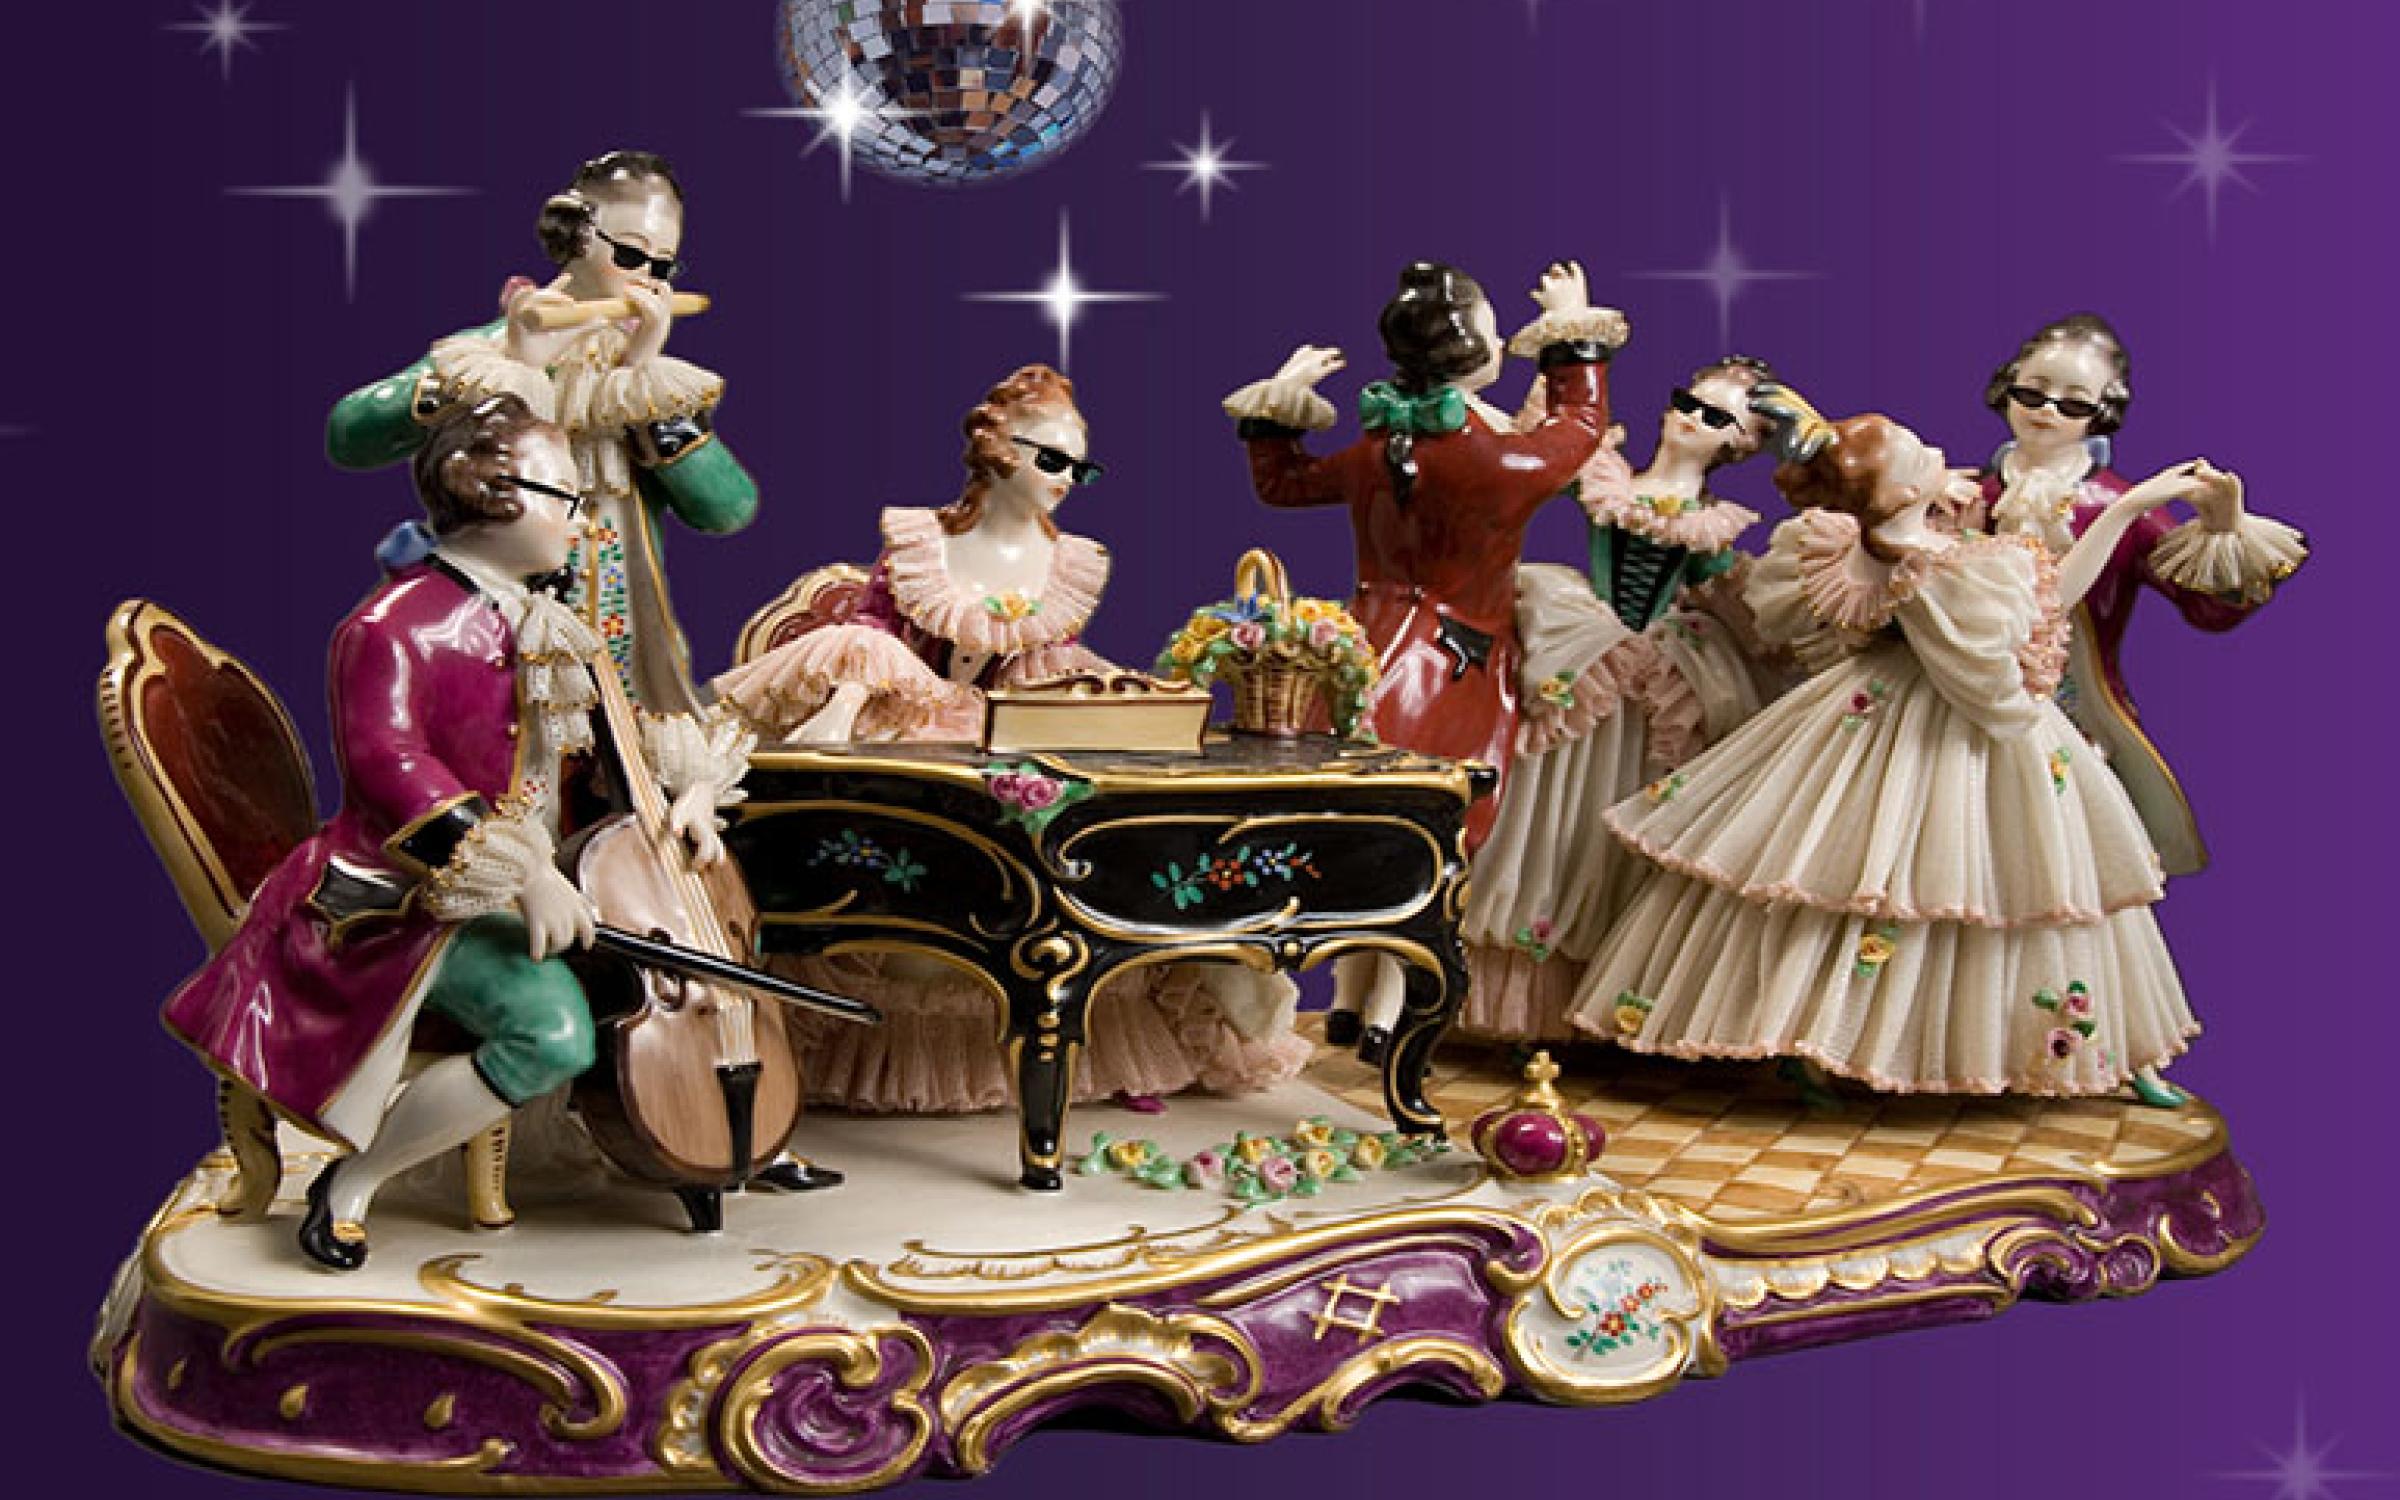 Porcelain dolls with sunglasses and fancy clothing dance around a piano under a disco ball in front of a purple background